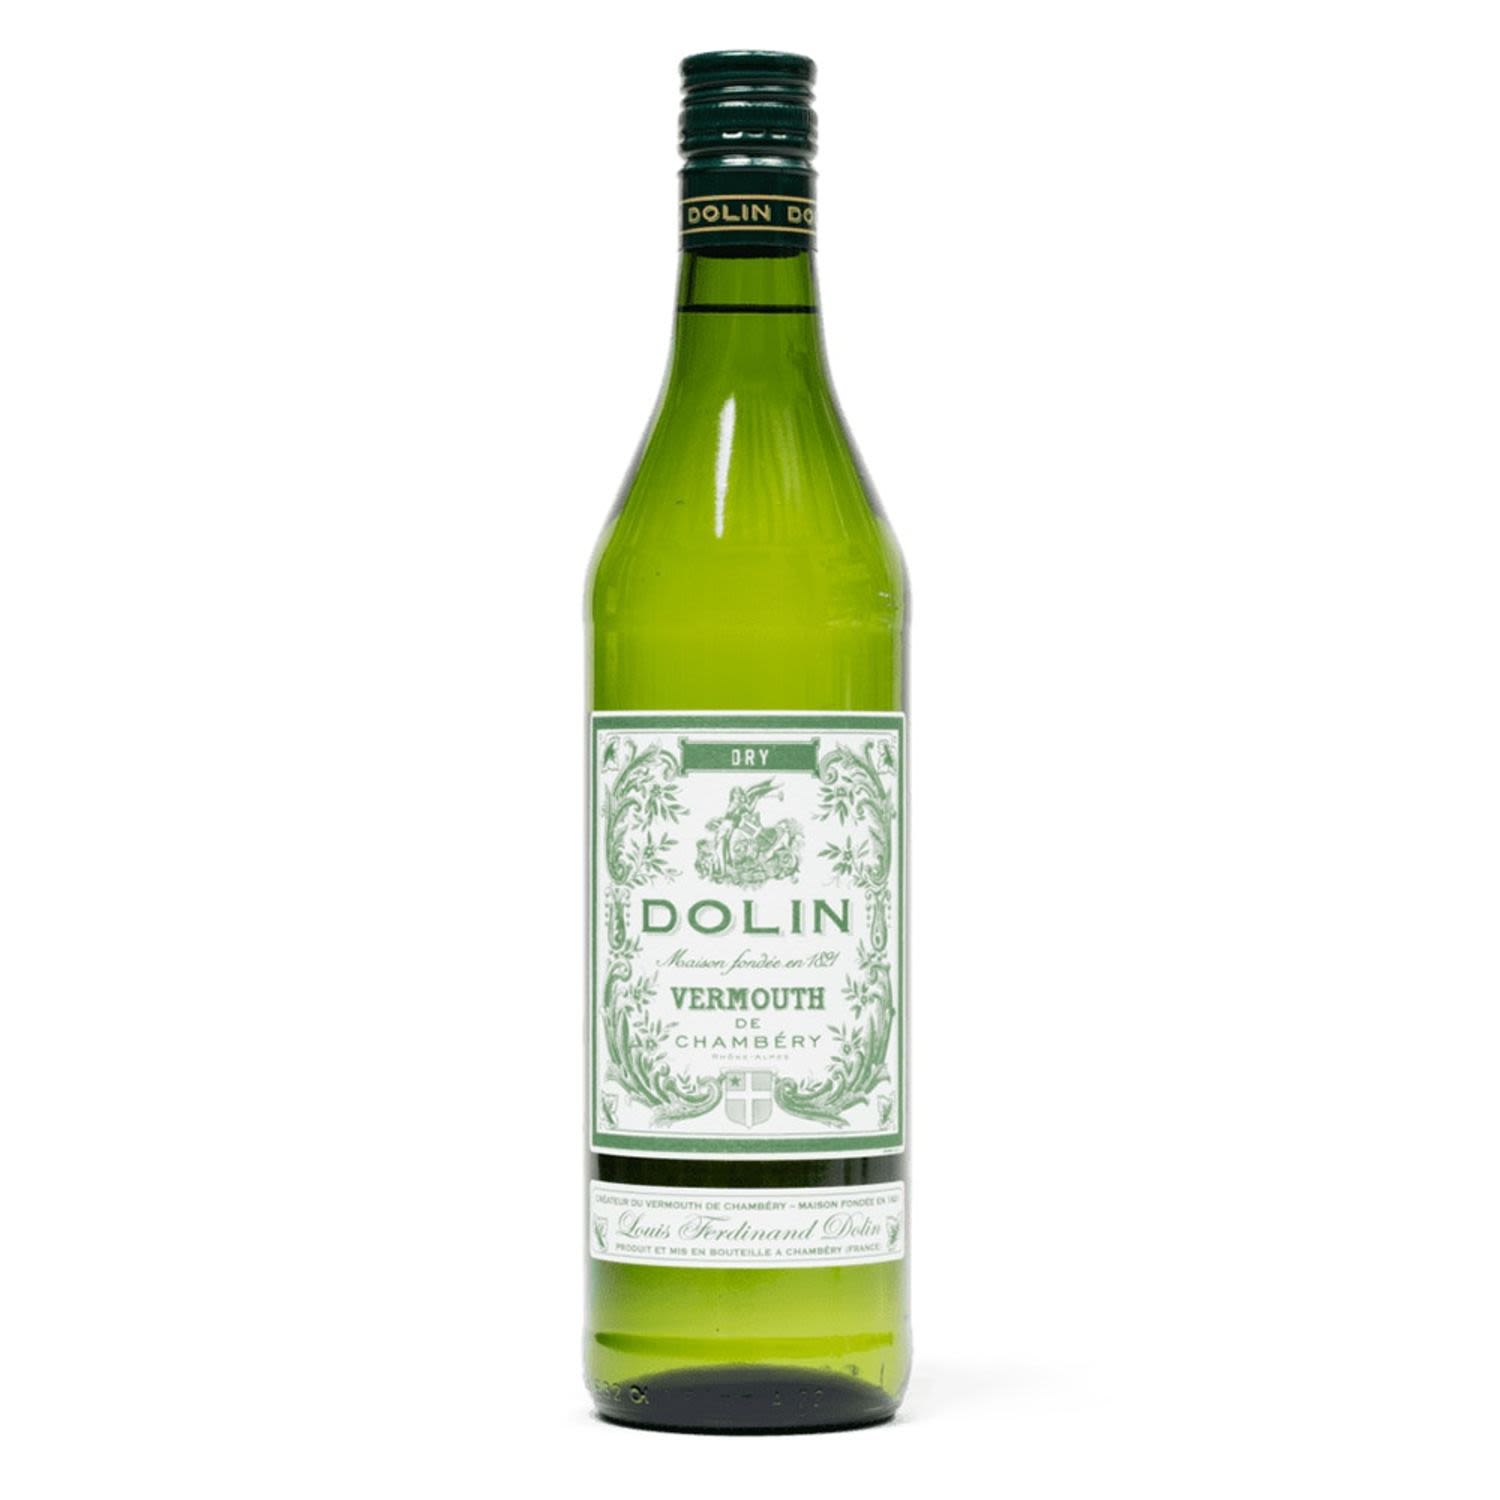 Dolin dry vermouth is made from a unique blend of 15 botanicals and spices that macerate in a specific white wine, Ugni Blanc, like the other Dolin vermouths. Absinthe, brooklime, rose and orange bark are the best-known ones, but you can also taste verbena or yellow genepi. Slightly sweet, this dry vermouth is particularly appreciated by bartenders for its subtlety and elegance. You can of course also enjoy this Dolin dry vermouth as an aperitif, neat or on the rocks.<br /> <br />Alcohol Volume: 17.50%<br /><br />Pack Format: Bottle<br /><br />Standard Drinks: 10.4</br /><br />Pack Type: Bottle<br /><br />Country of Origin: France<br /><br />Region: Frankland River<br /><br />Vintage: Non Vintage<br />